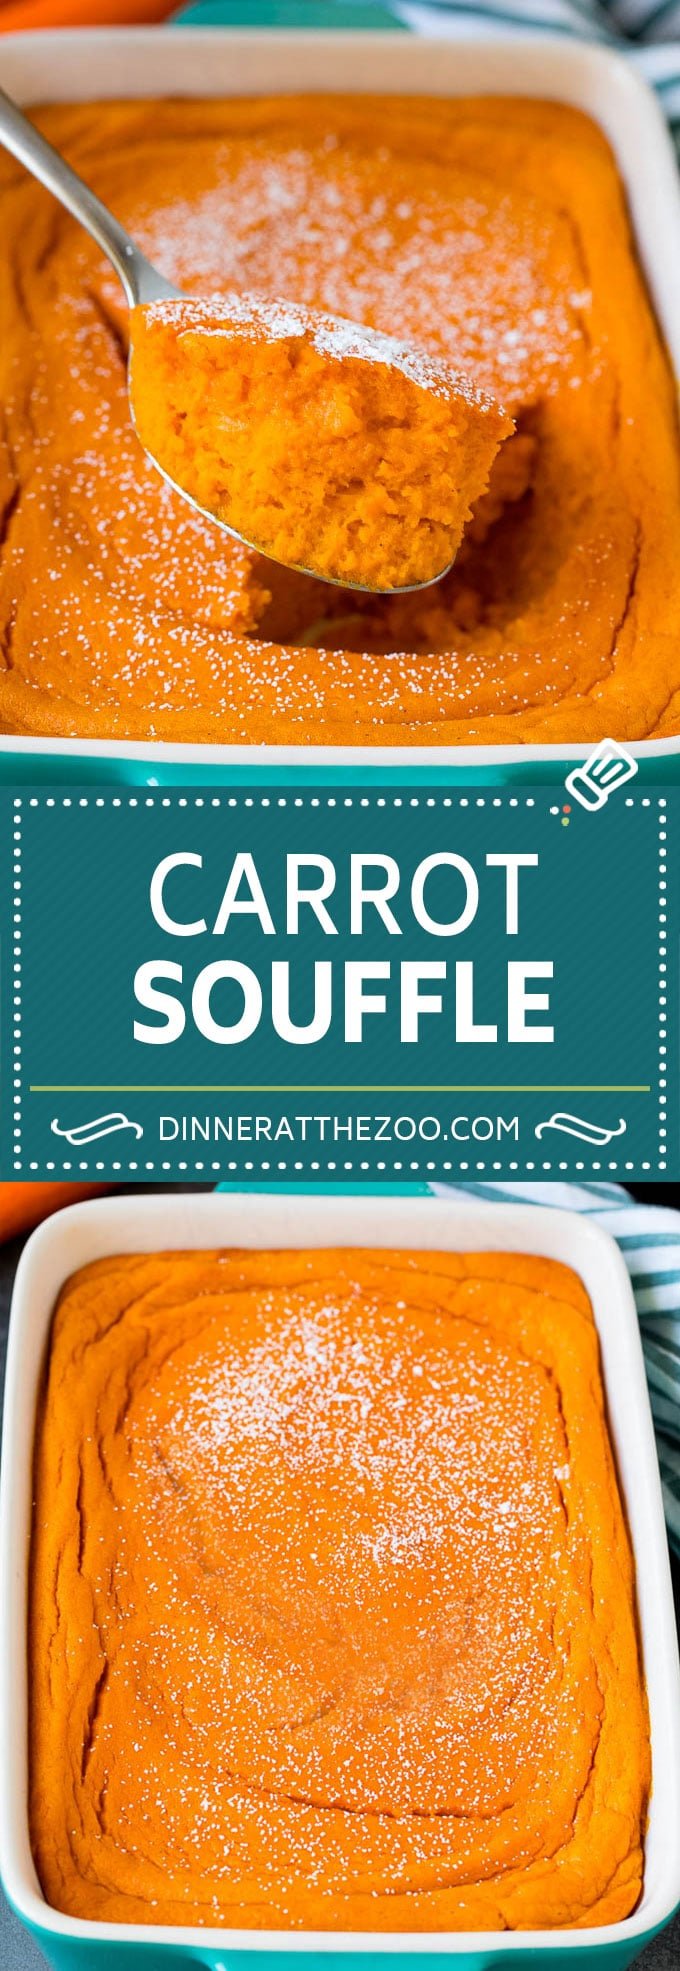 This carrot souffle is made with pureed carrots, sugar, butter and eggs, all cooked together to golden brown perfection.